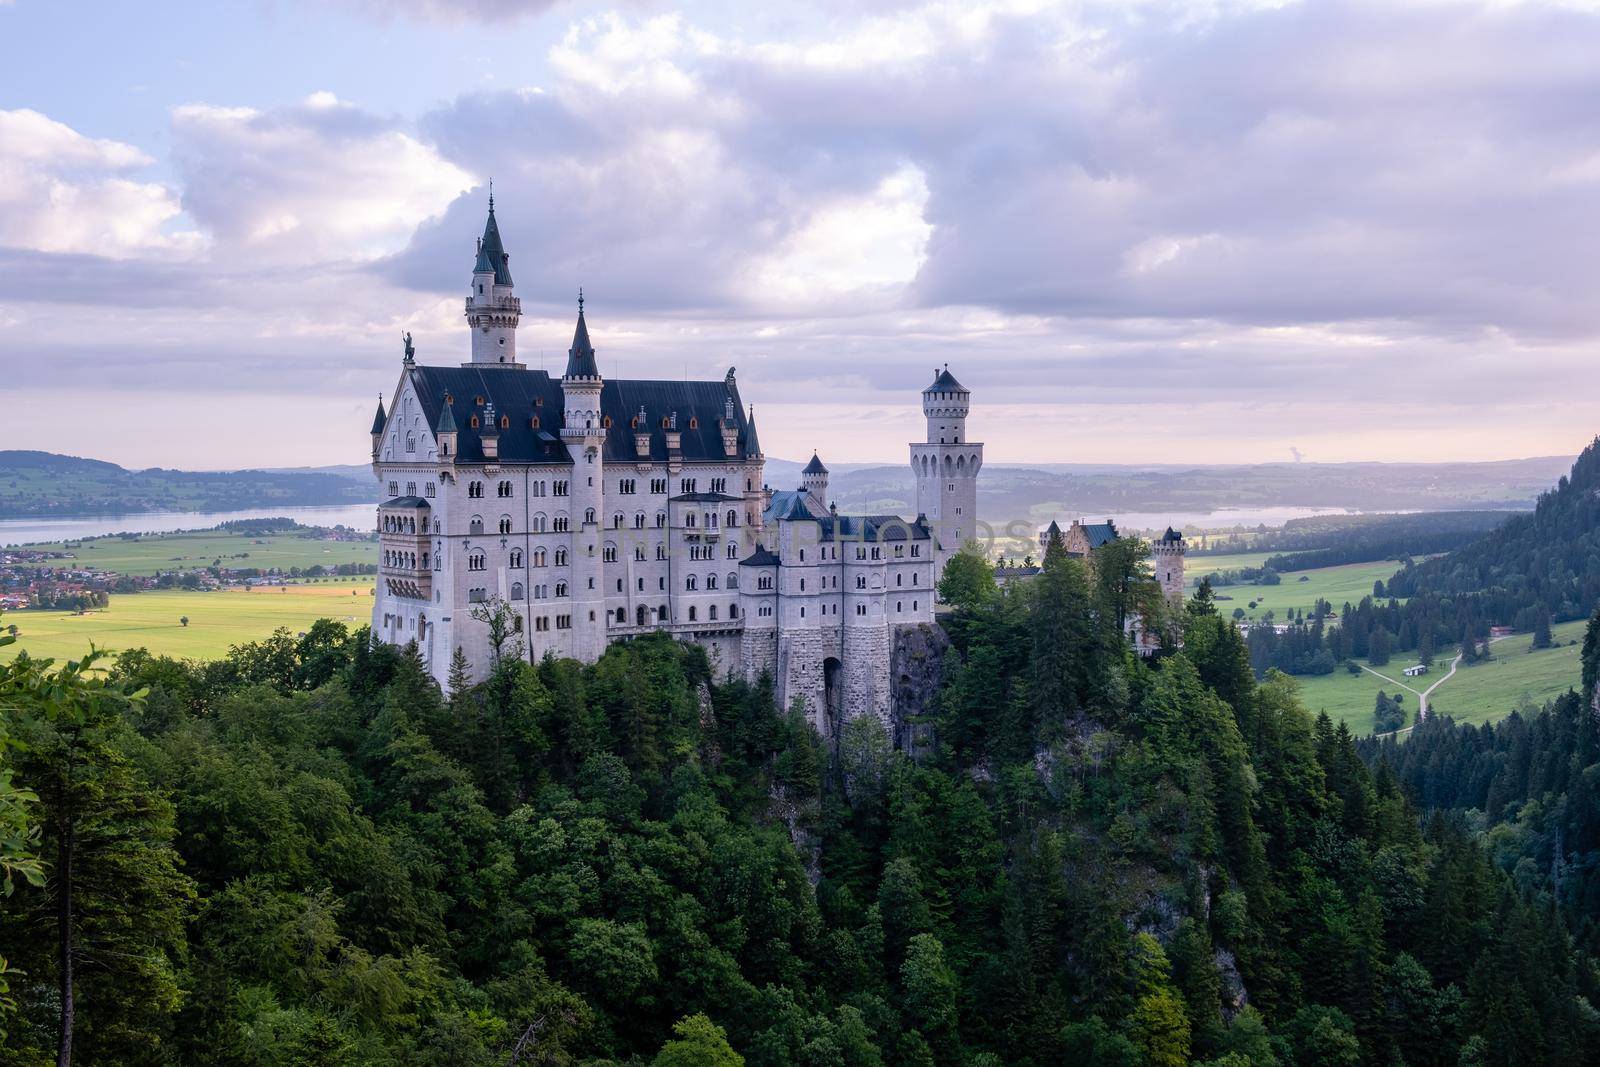 Beautiful view of world-famous Neuschwanstein Castle, the nineteenth-century Romanesque Revival palace built for King Ludwig II on a rugged cliff near Fussen, southwest Bavaria, Germany. Europe